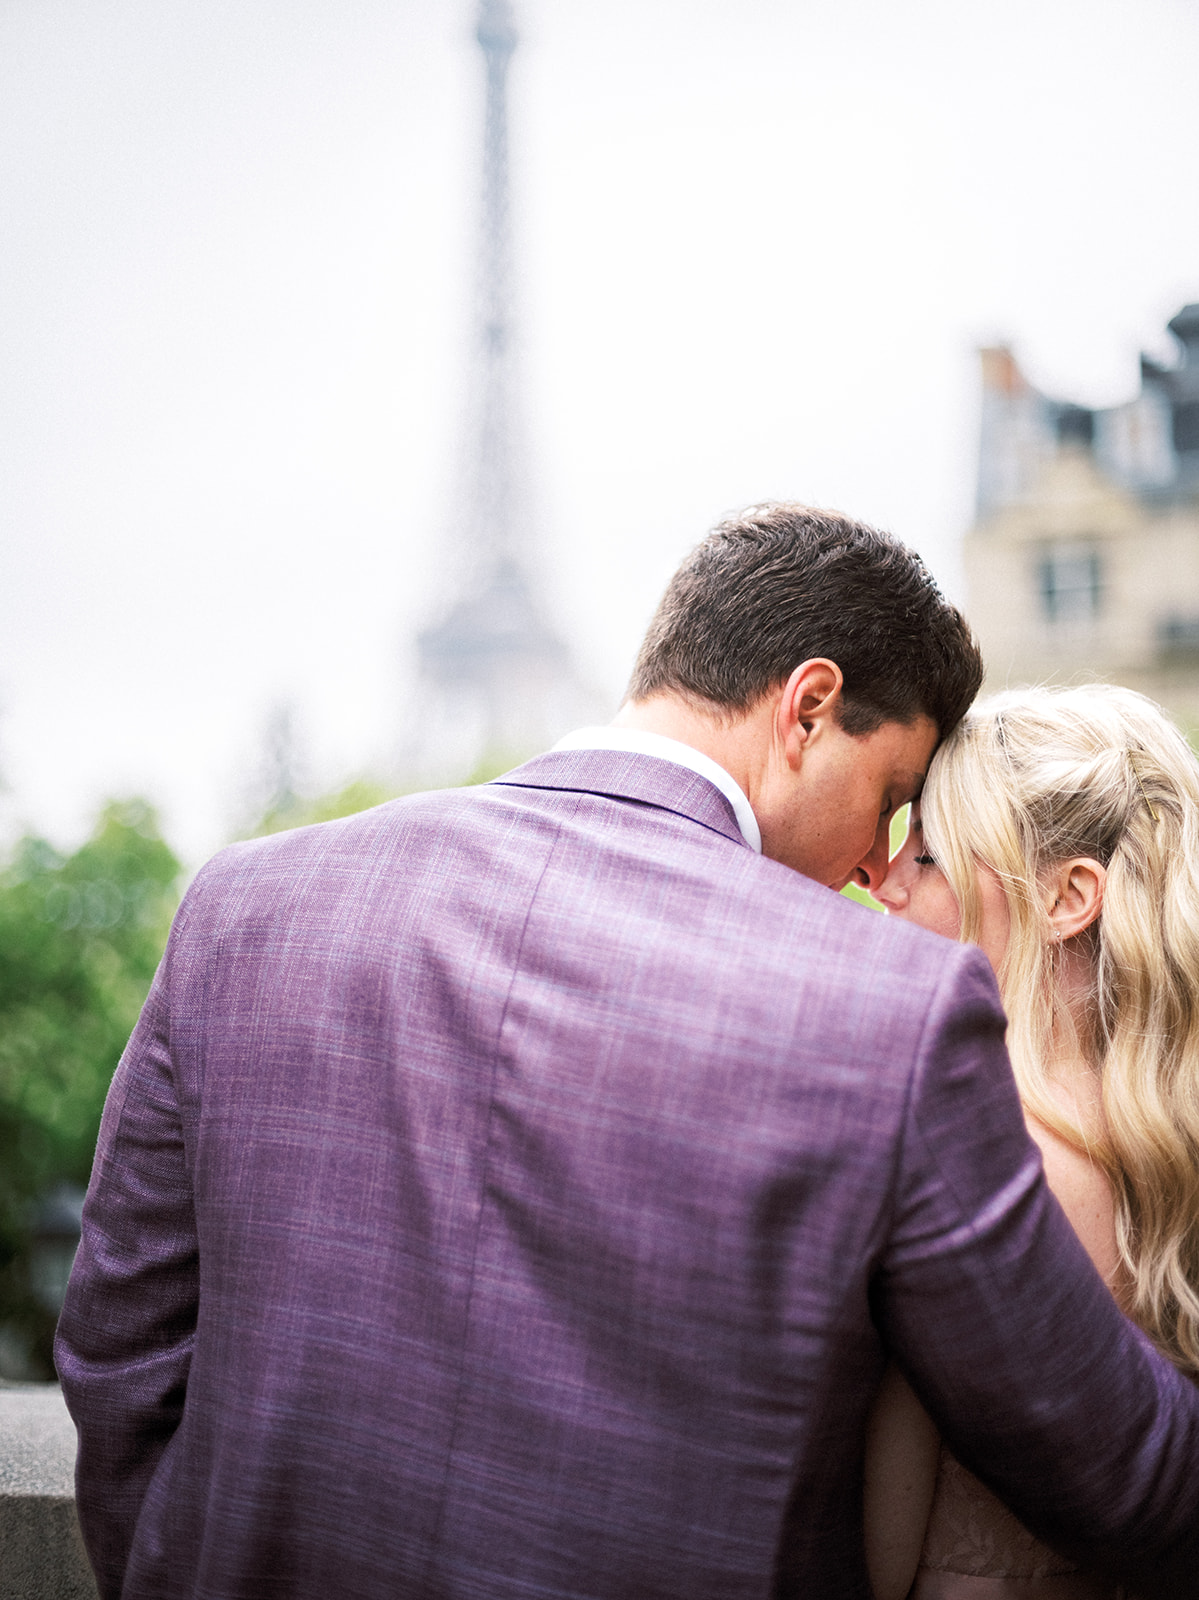 Couple touching foreheads with Eiffel Tower in the background.